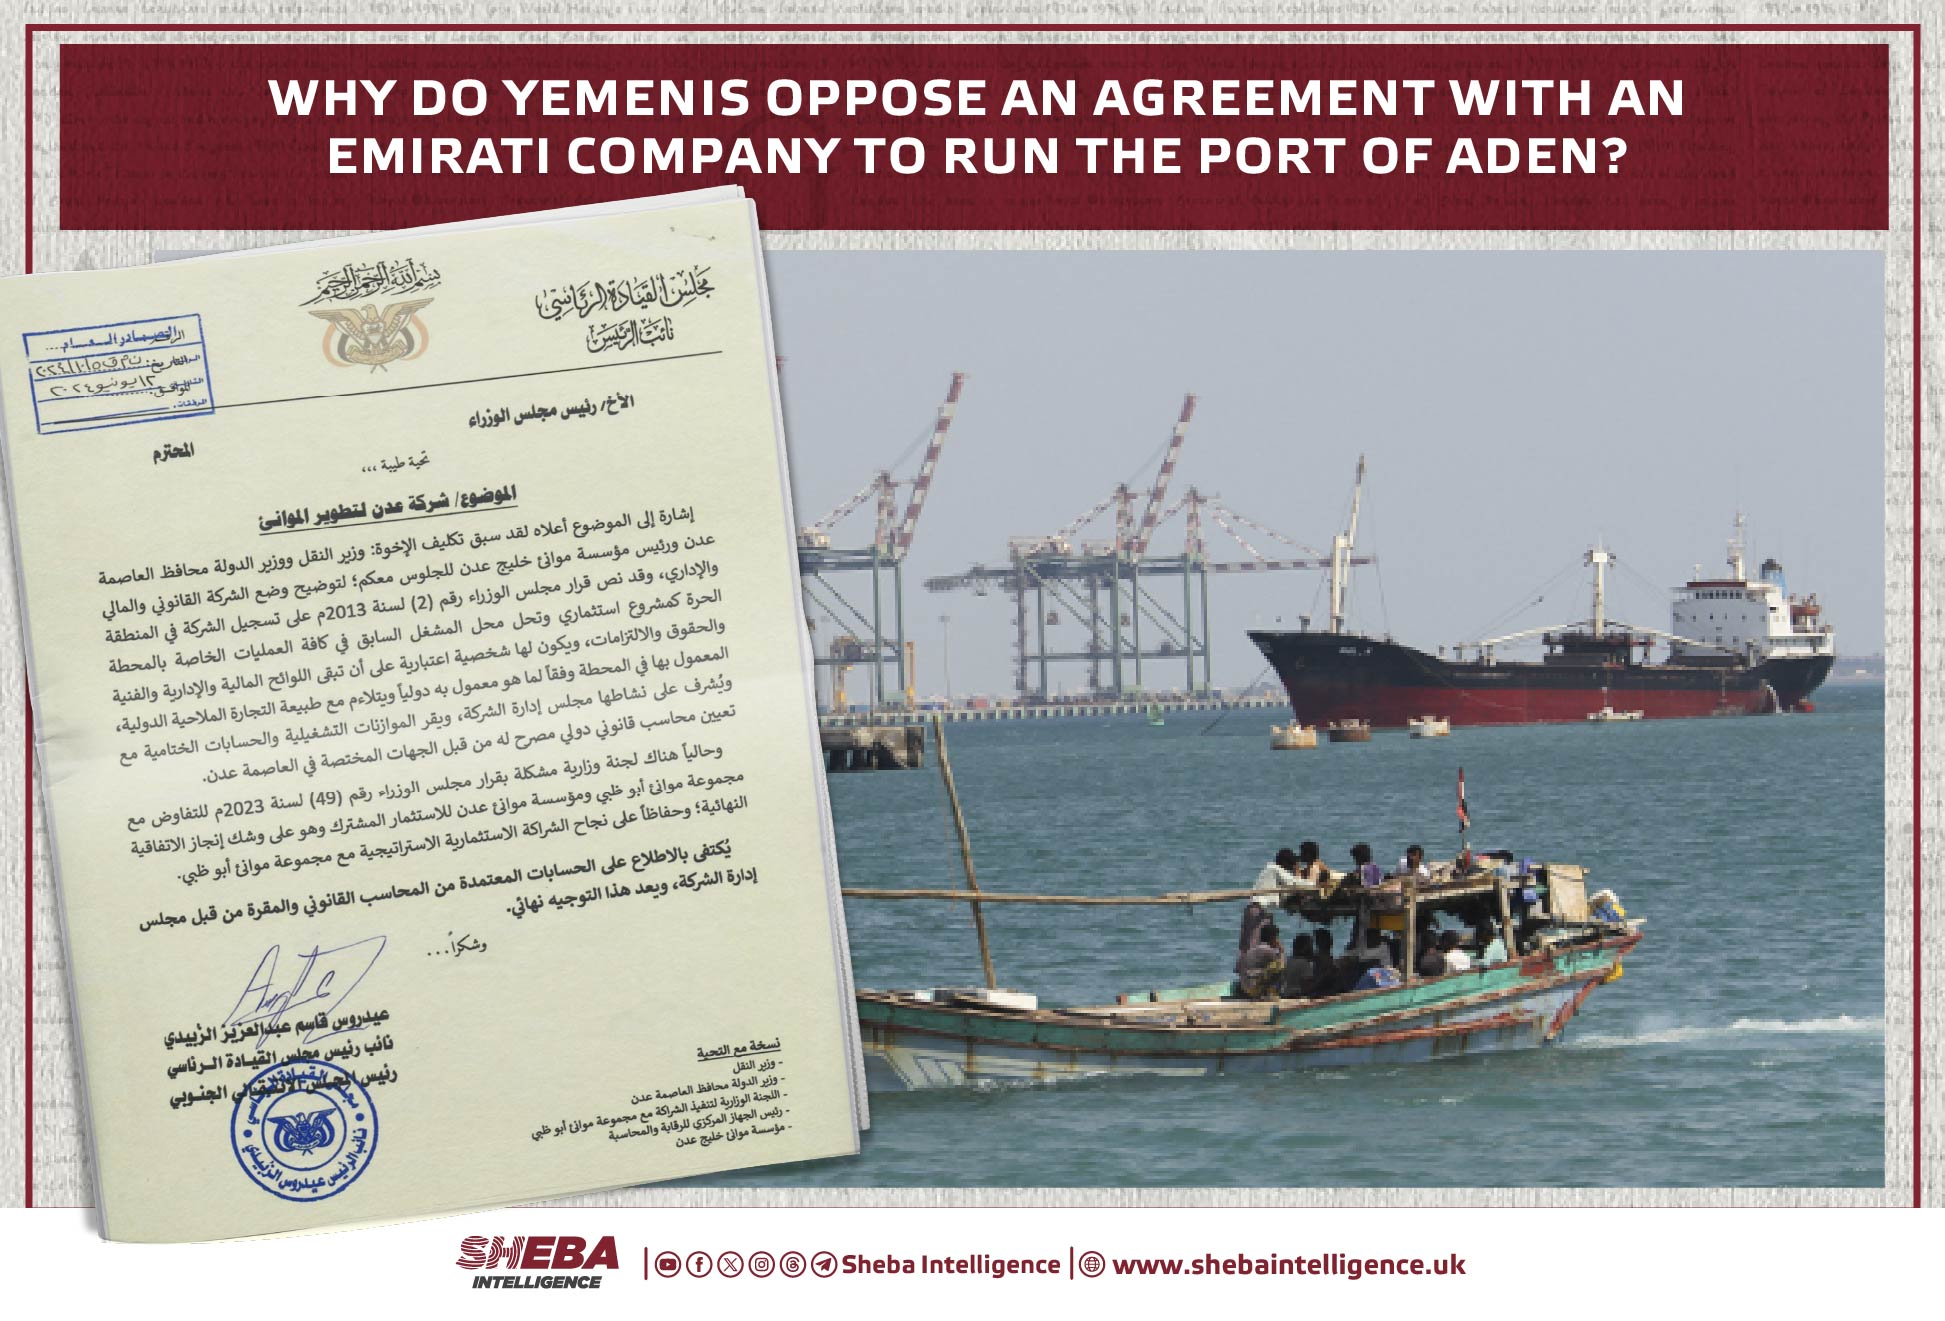 Why Do Yemenis Oppose an Agreement With an Emirati Company to Run the Port of Aden?